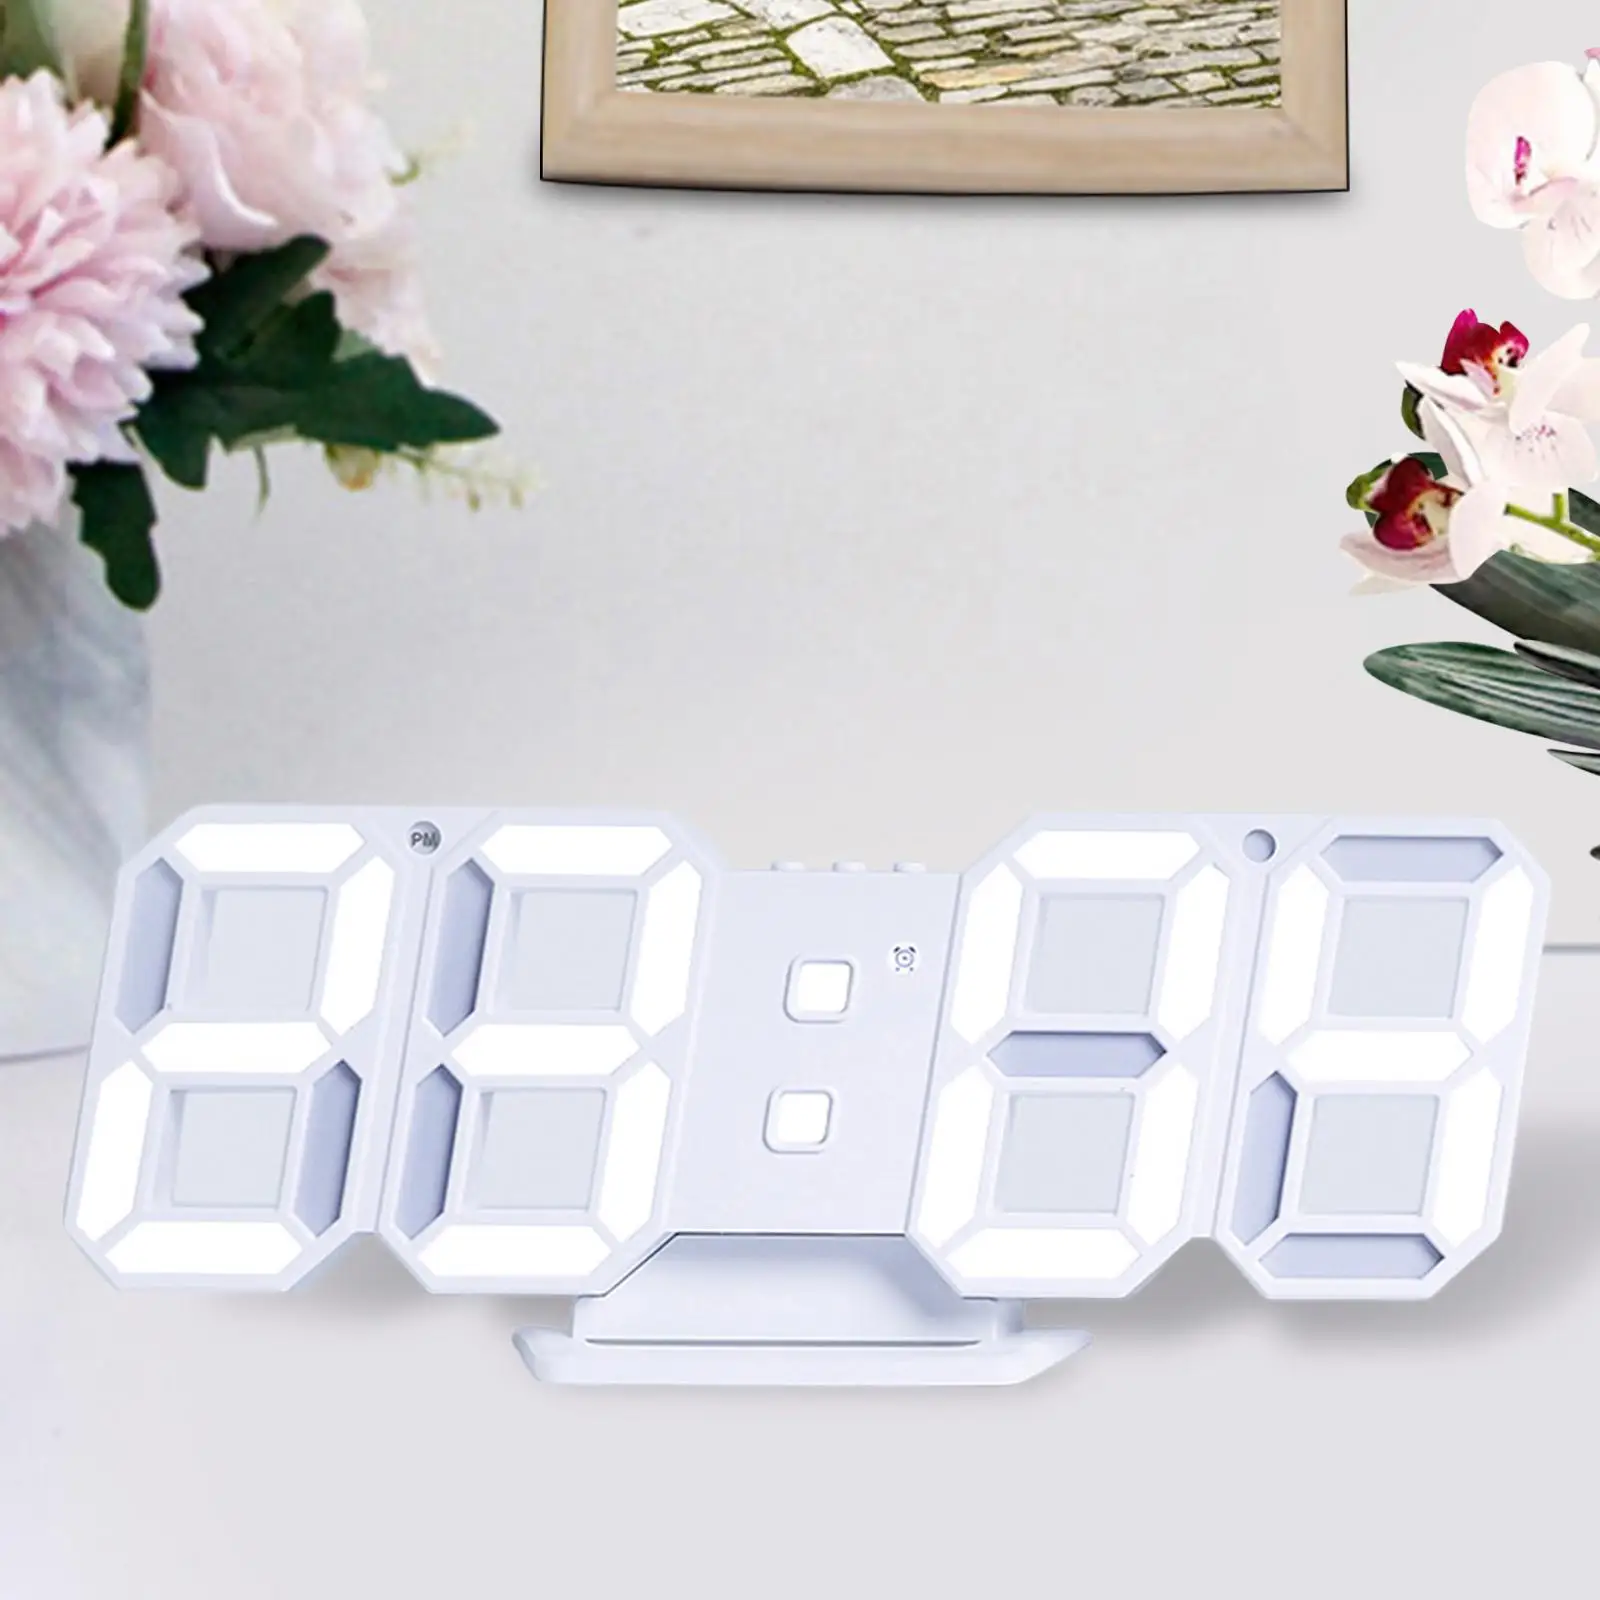 Alarm Clock with USB Table Electronic Calendar Desk Clock Large LCD Display Alarm Clock with USB Port for Home Birthday Gifts